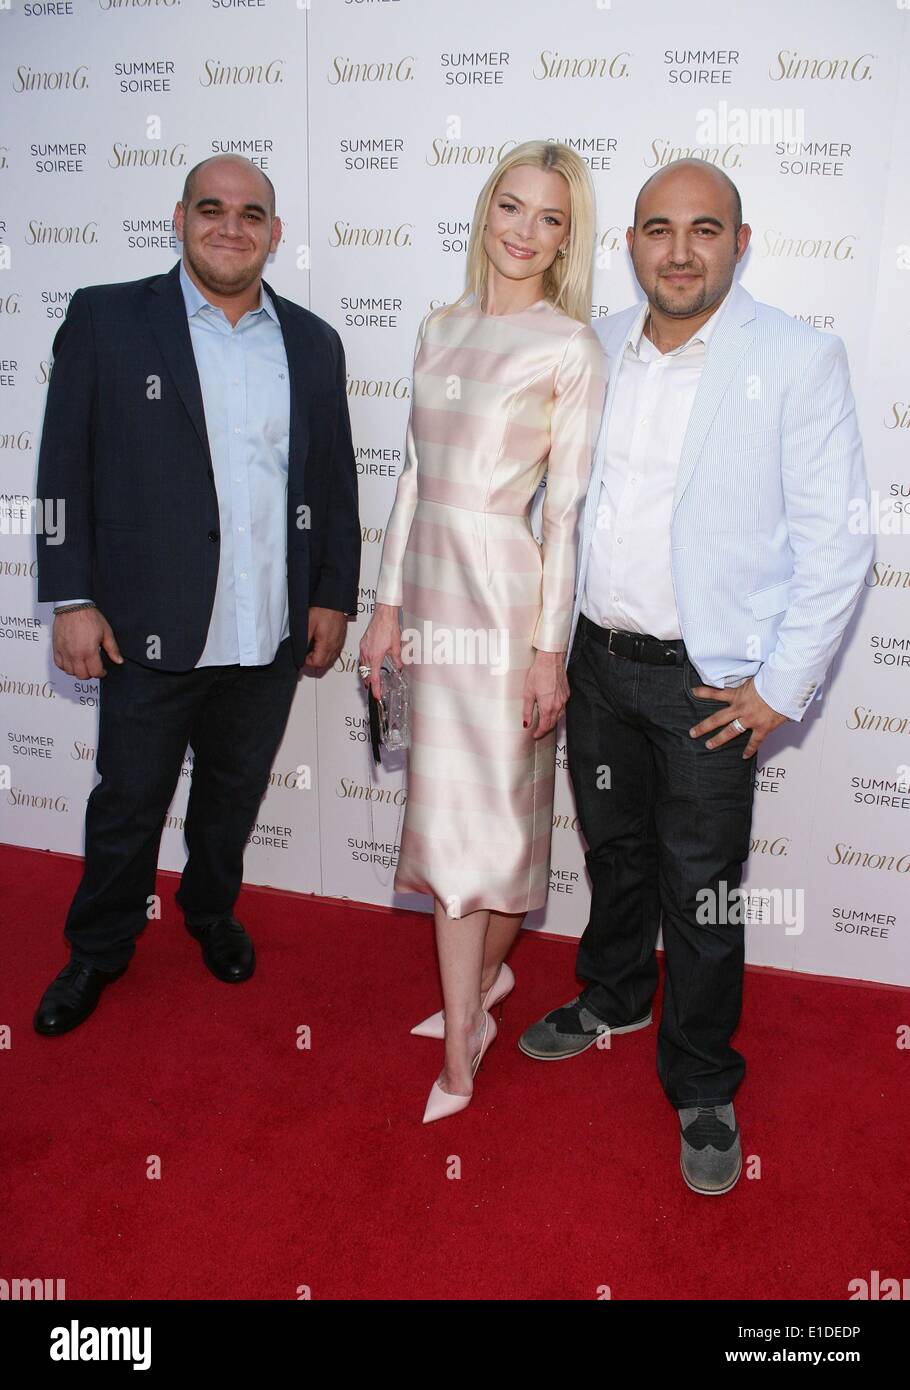 Las Vegas, NV, USA. 31st May, 2014. Hratch Ghanimian, Jaime King, Zaven Ghanimian at arrivals for Annual Simon G Soiree, Four Seasons Hotel, Las Vegas, NV May 31, 2014. Credit:  James Atoa/Everett Collection/Alamy Live News Stock Photo